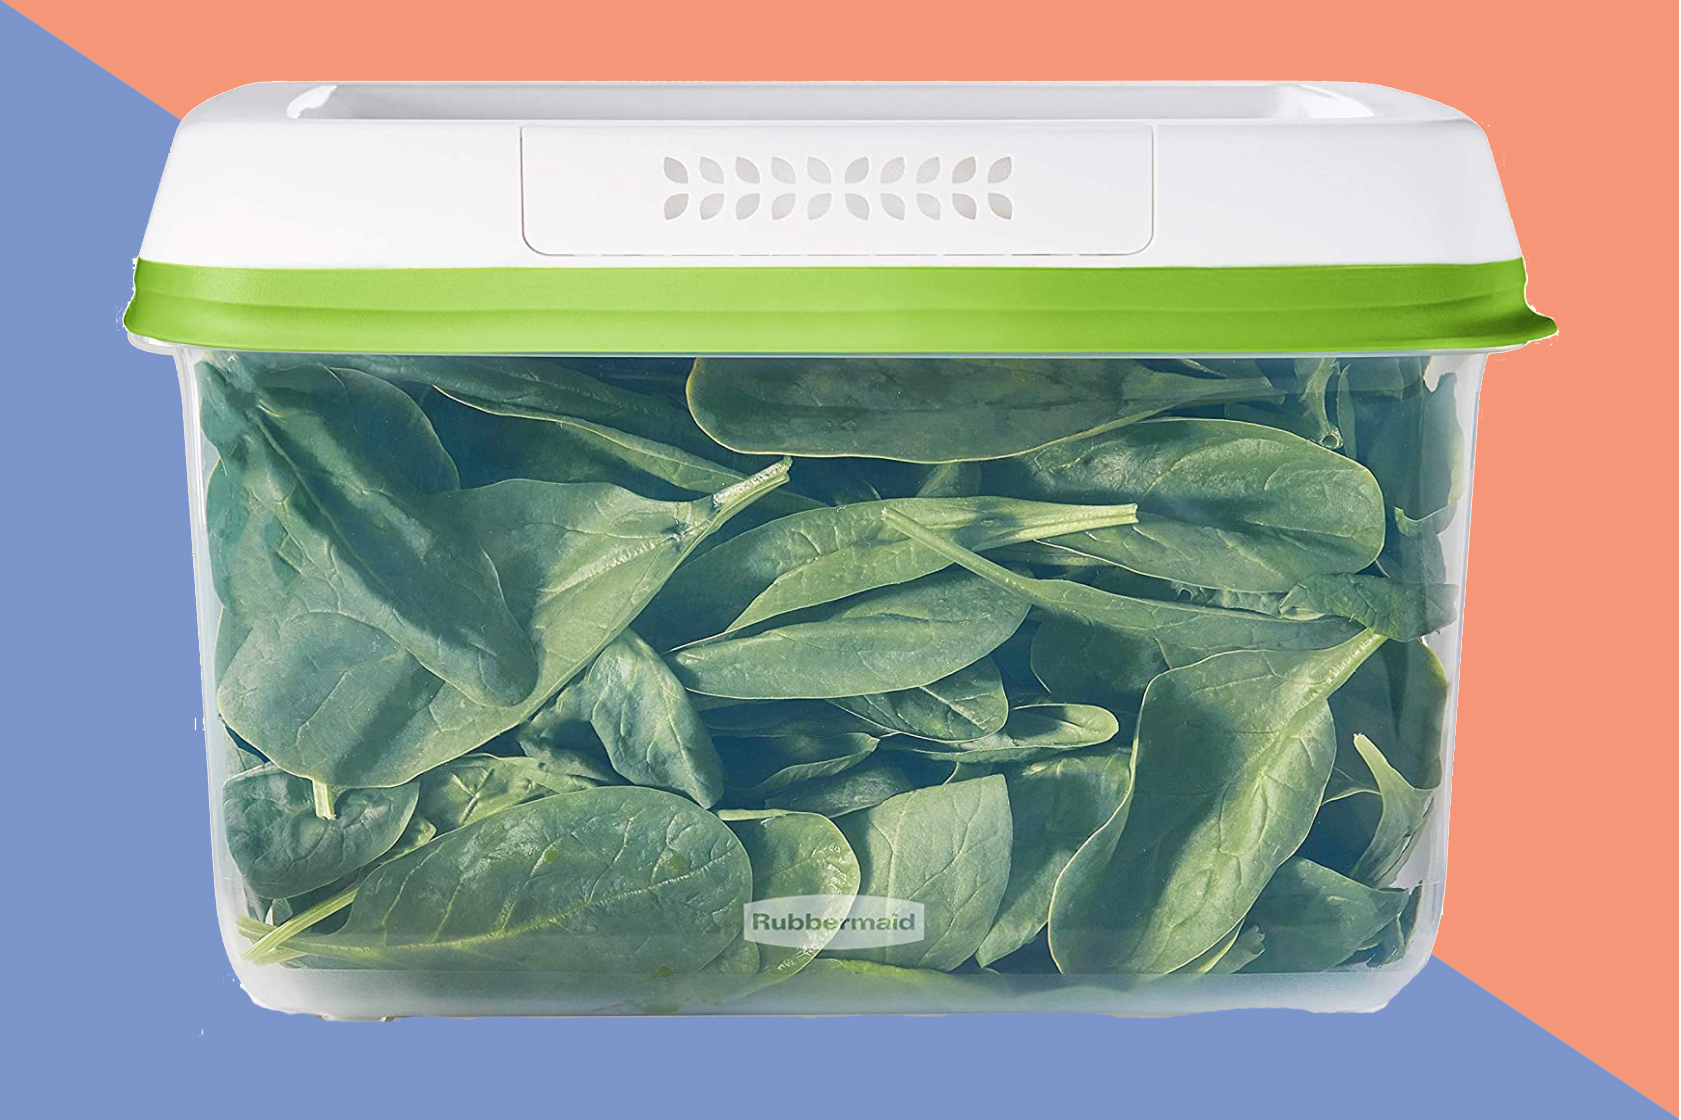 This $10 produce keeper is actually helping me eat healthier